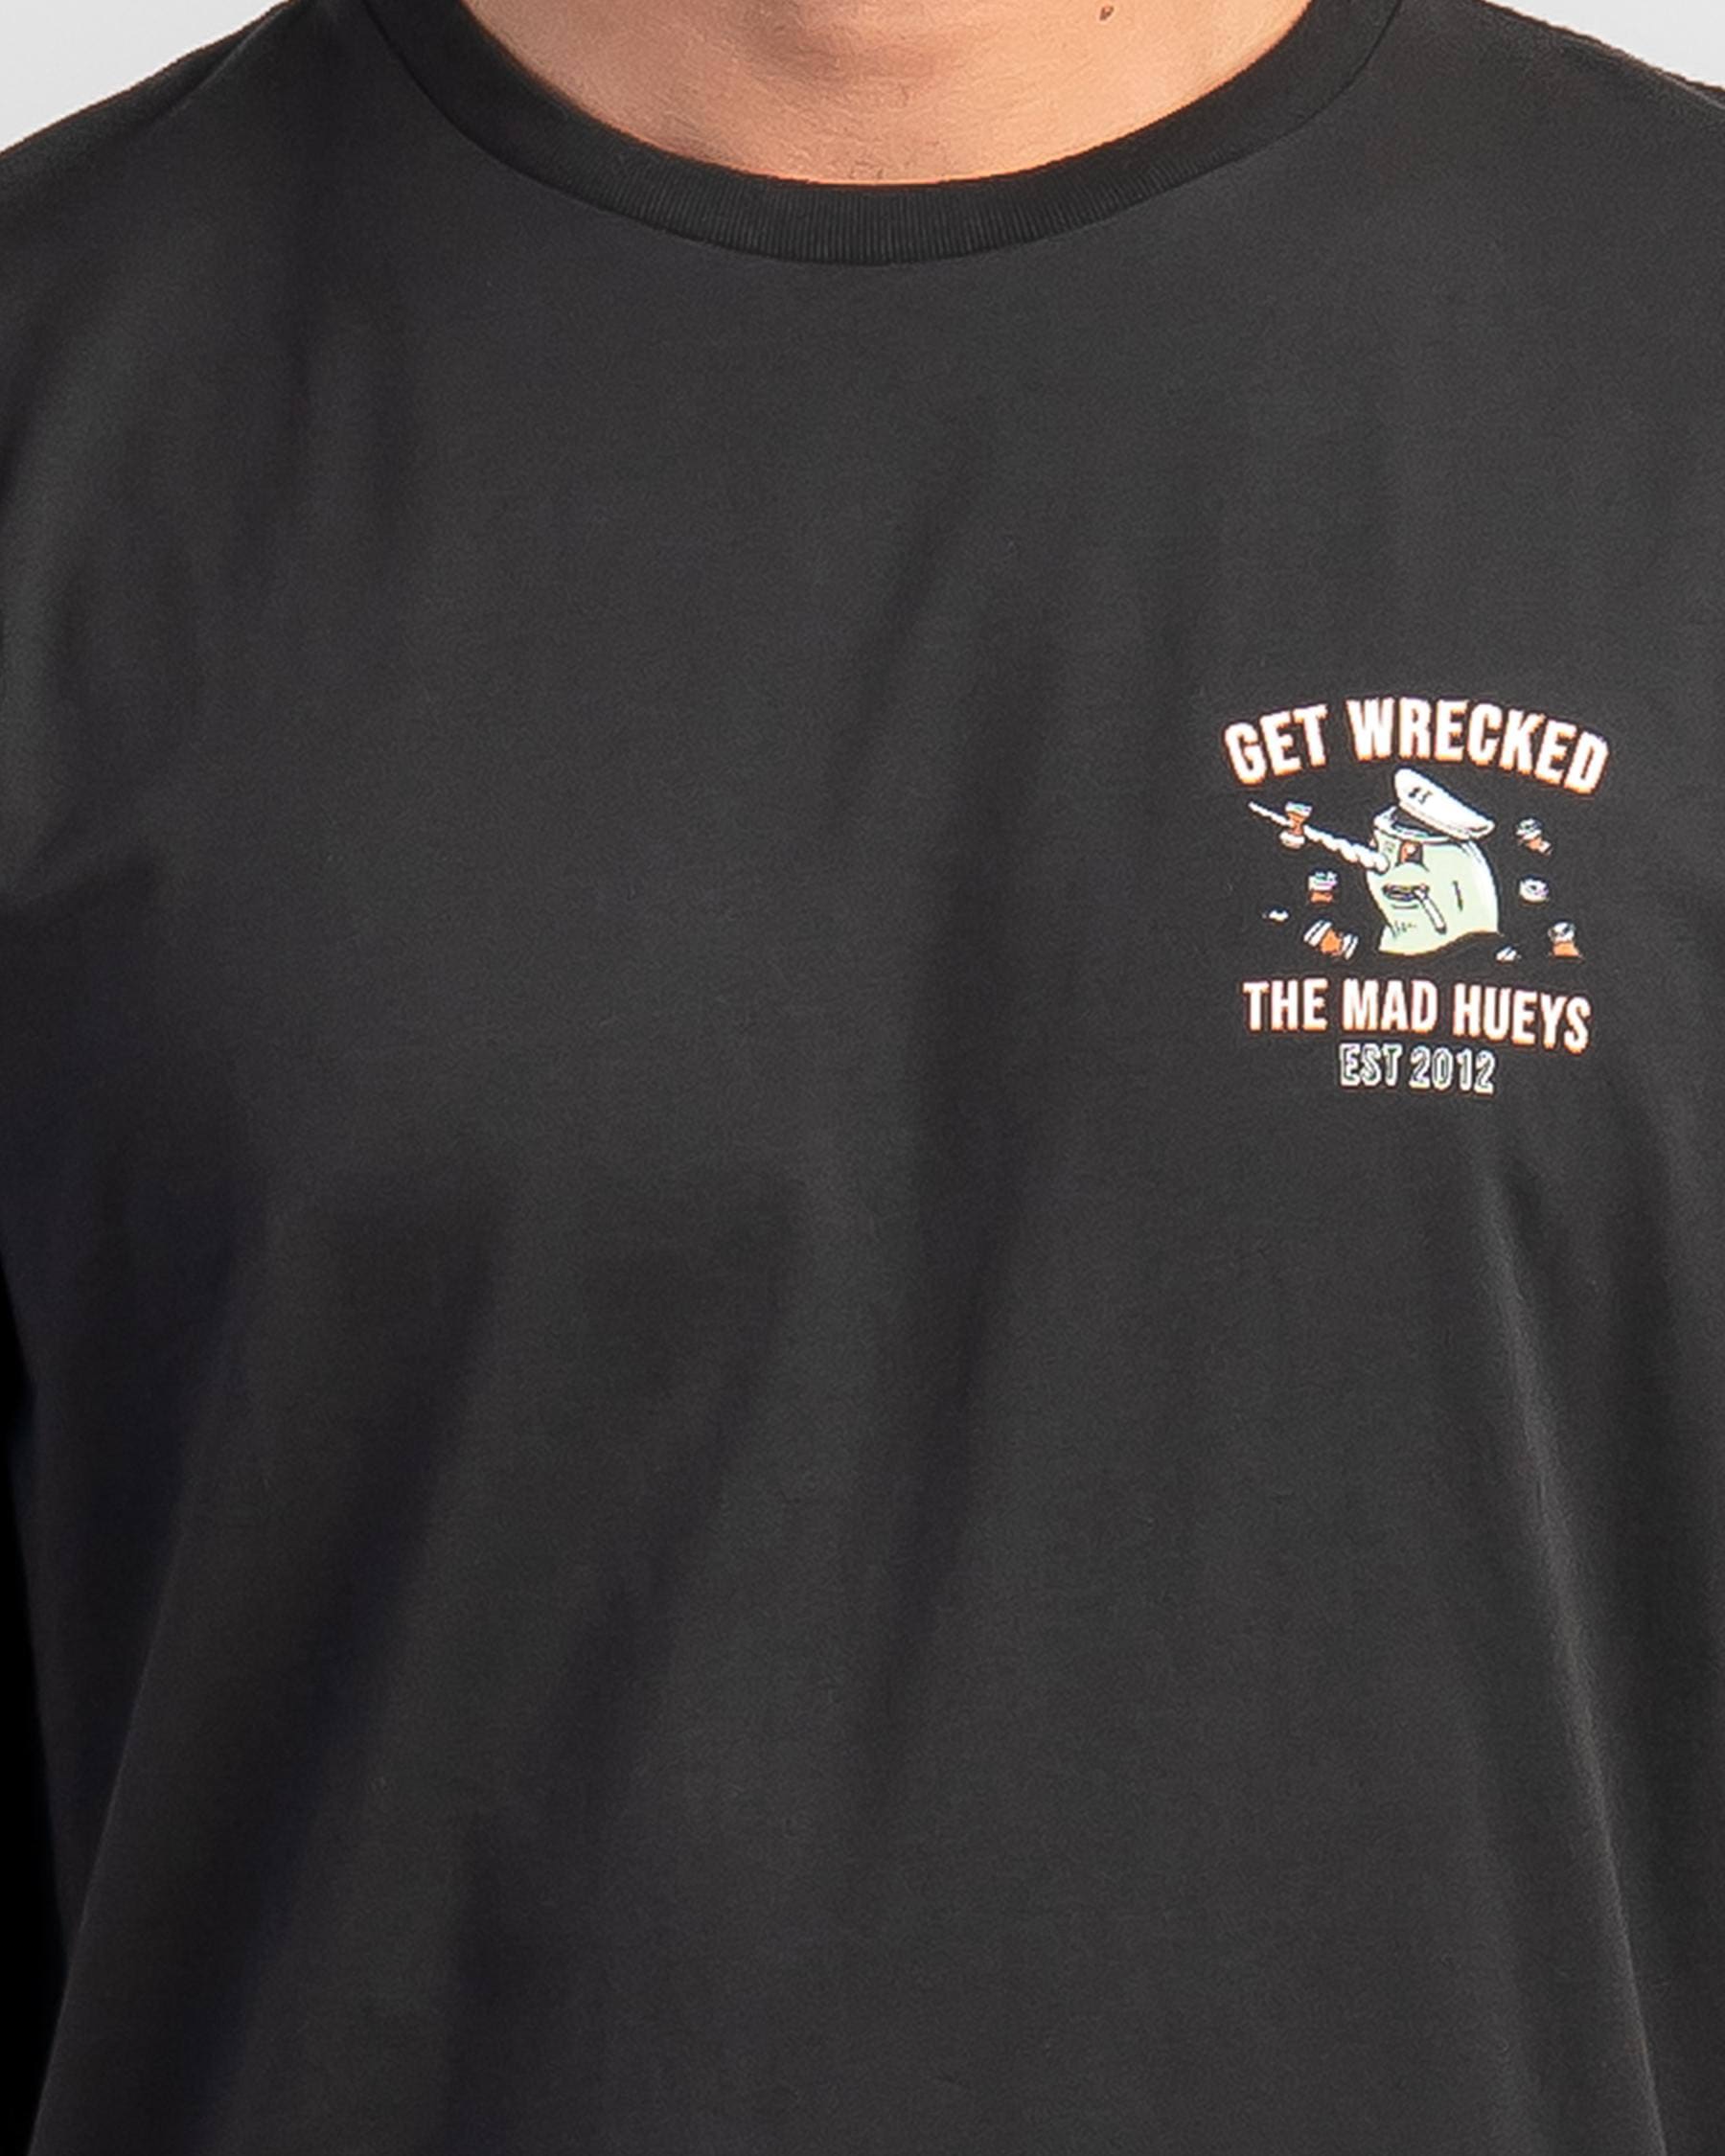 GETTING WRECKED SS TEE VINTAGE BLACK THE MAD HUEYS MENS SHORT SLEEVE